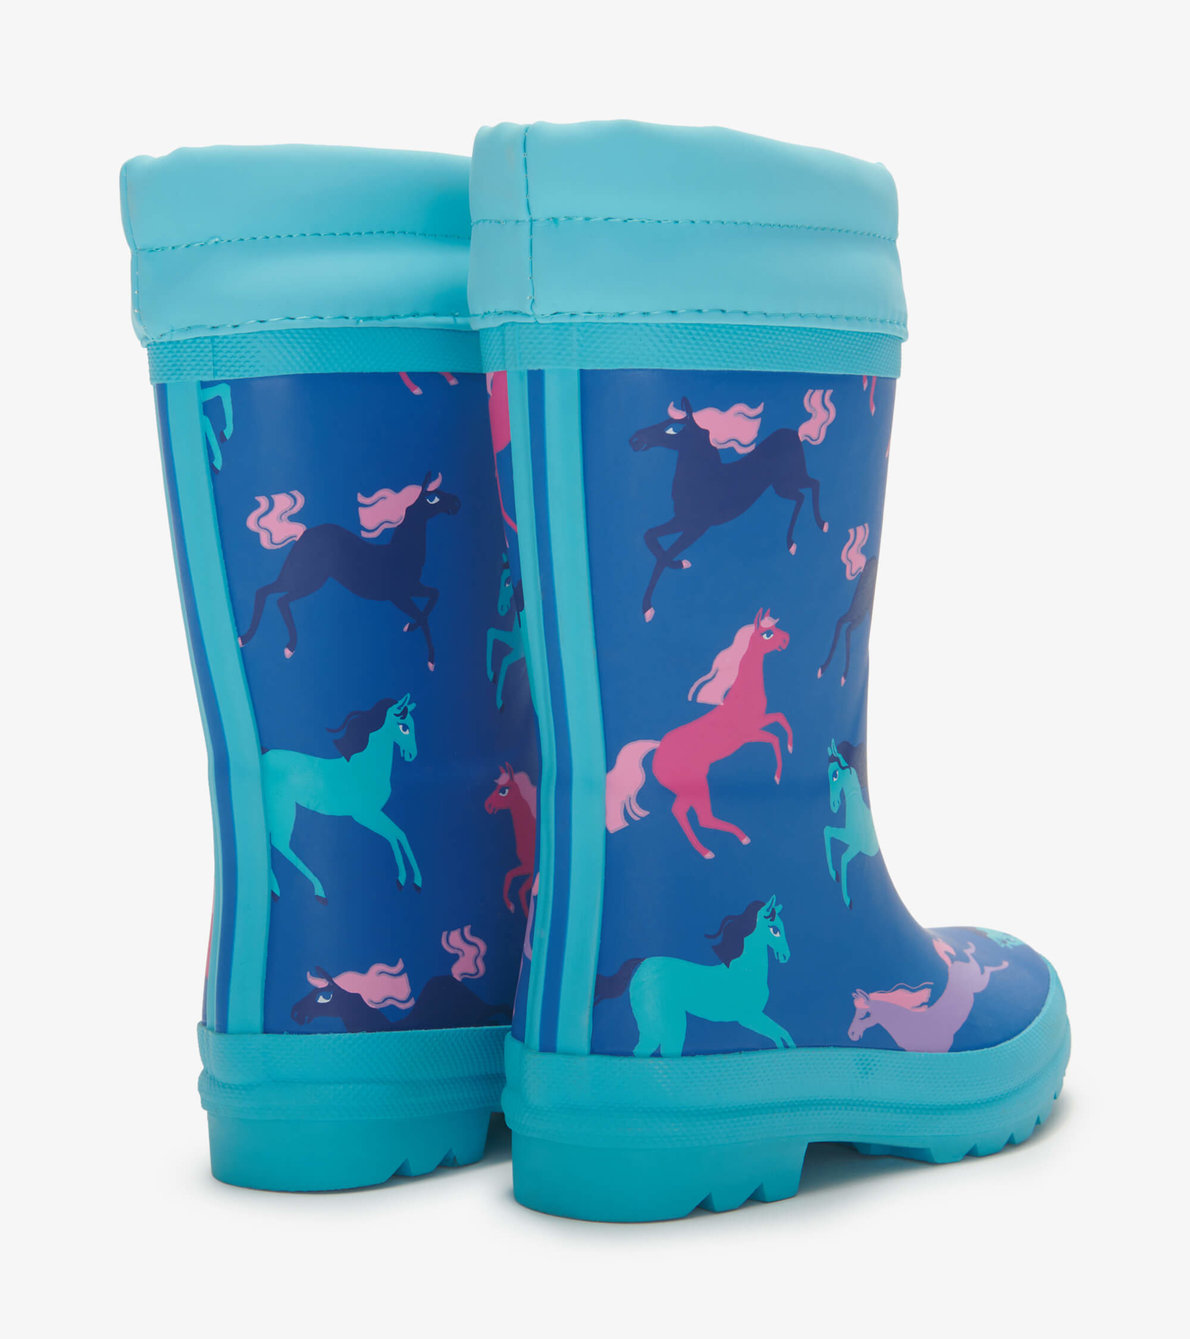 View larger image of Prancing Horses Sherpa Lined Kids Wellies